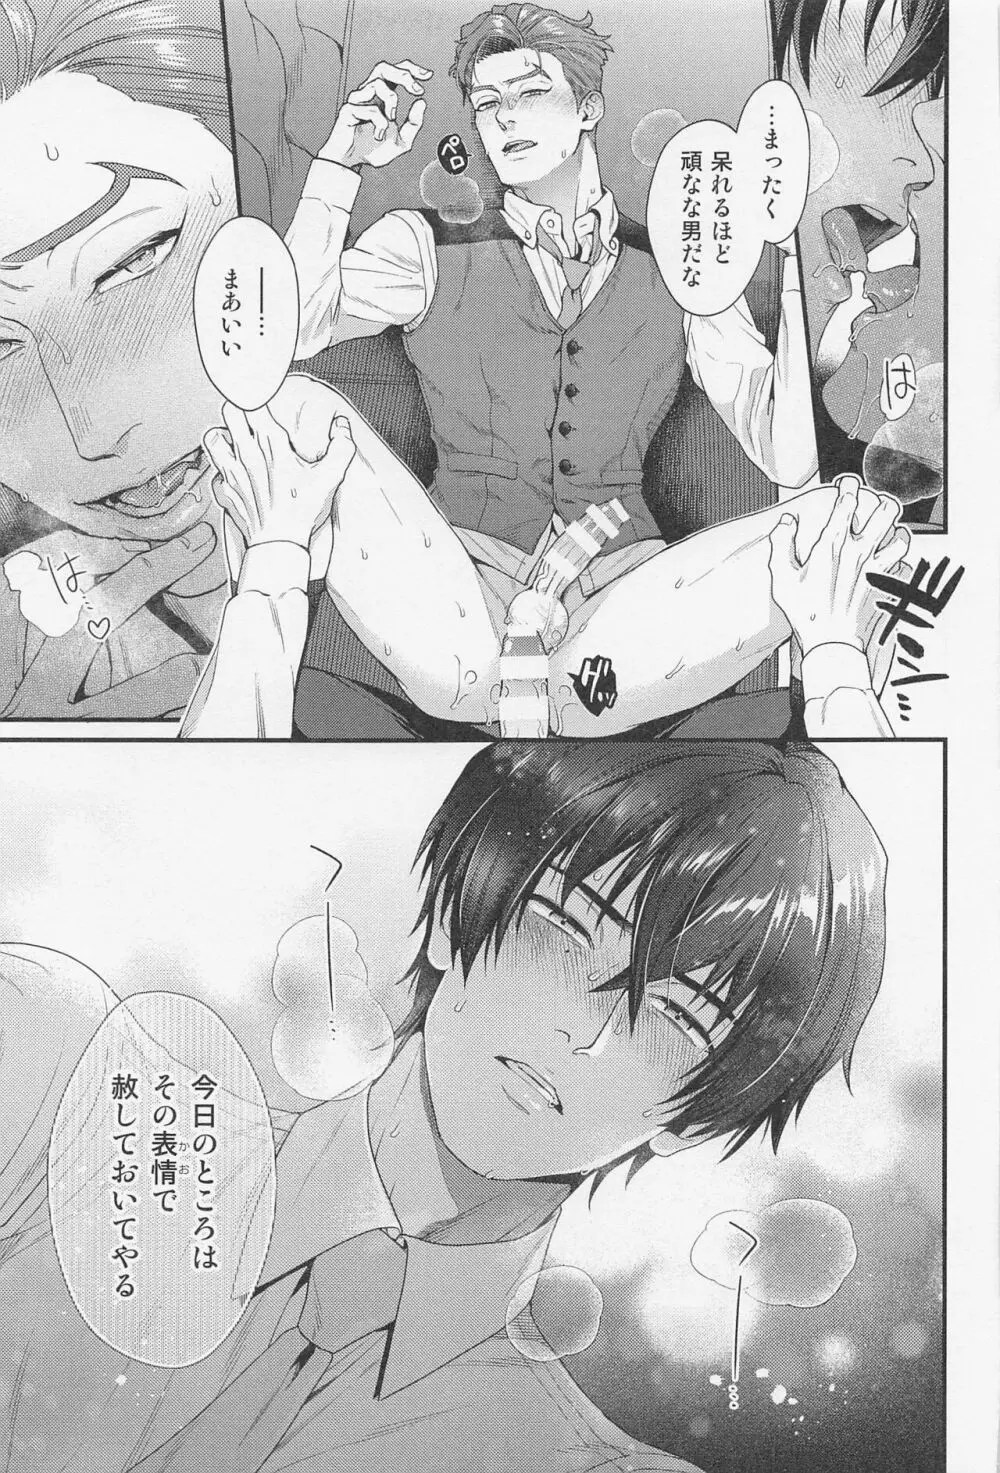 LOVE FIXED POINT - 愛の定点観測 Page.18